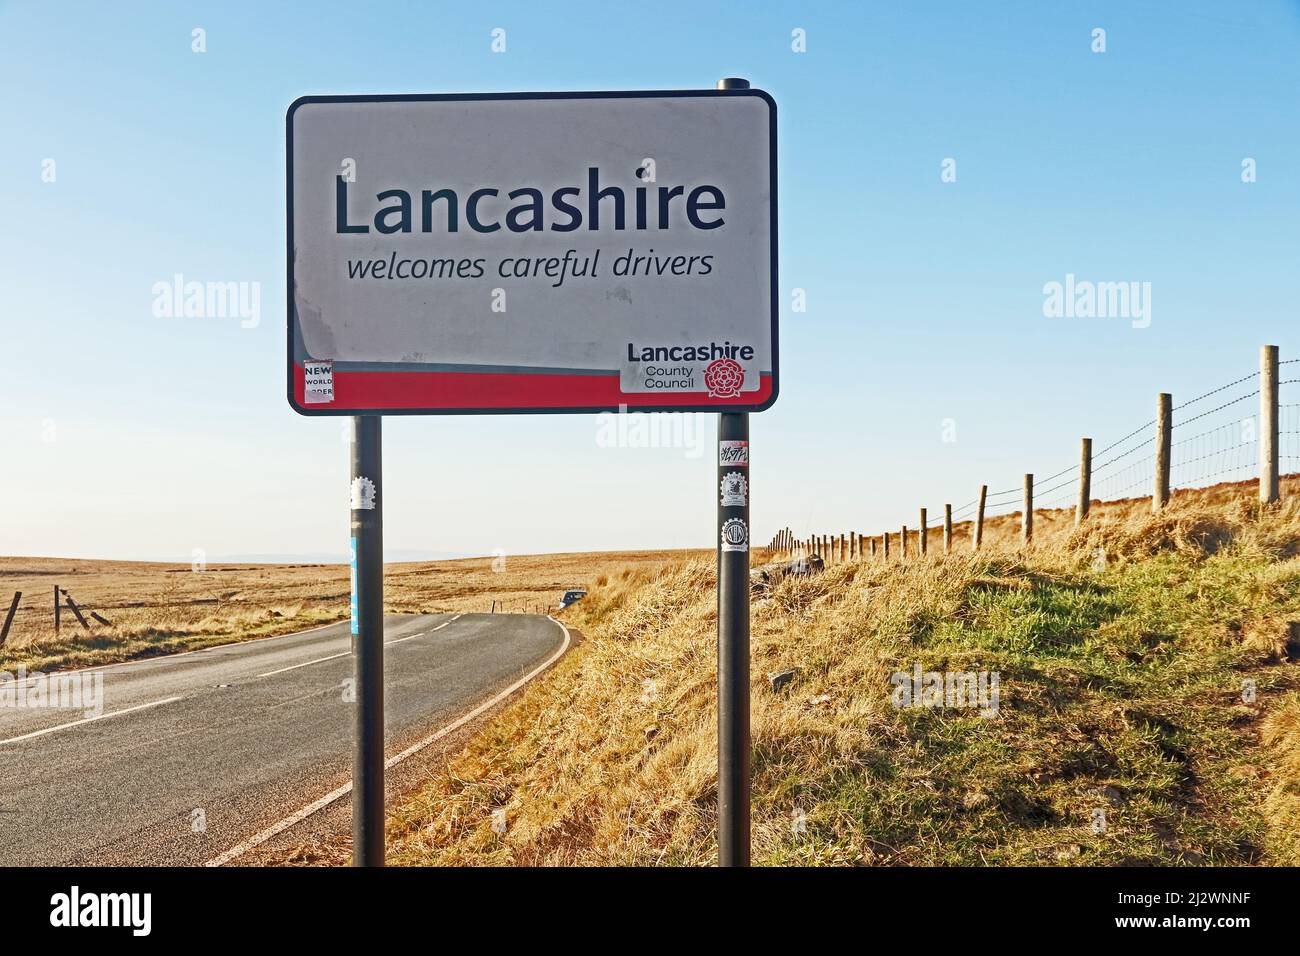 Lancashire county sign at side of road Stock Photo